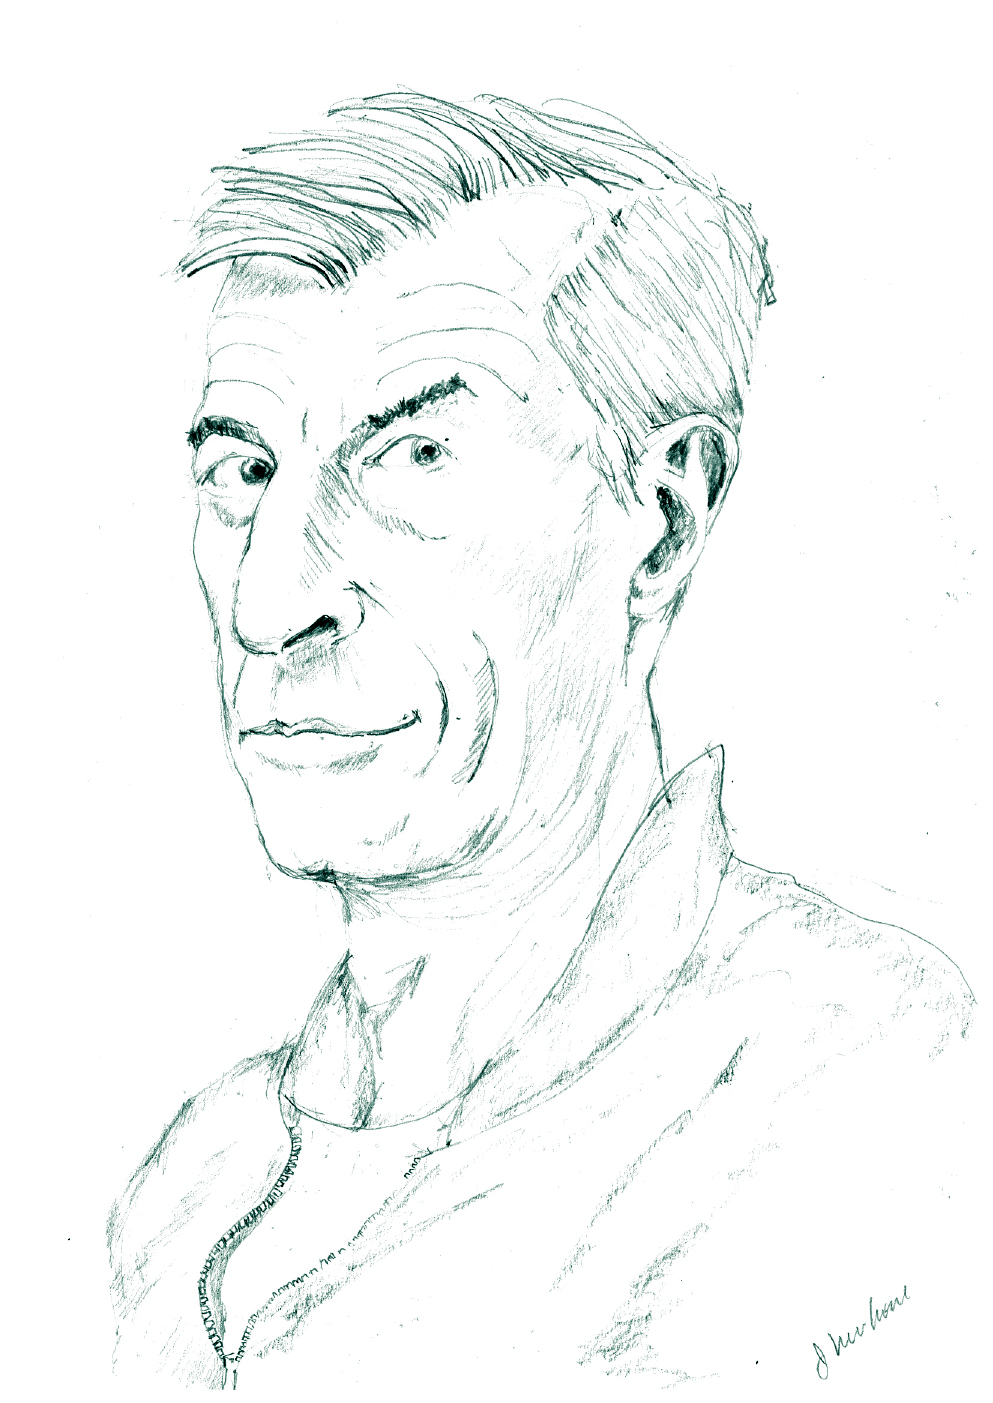 A drawing of a man